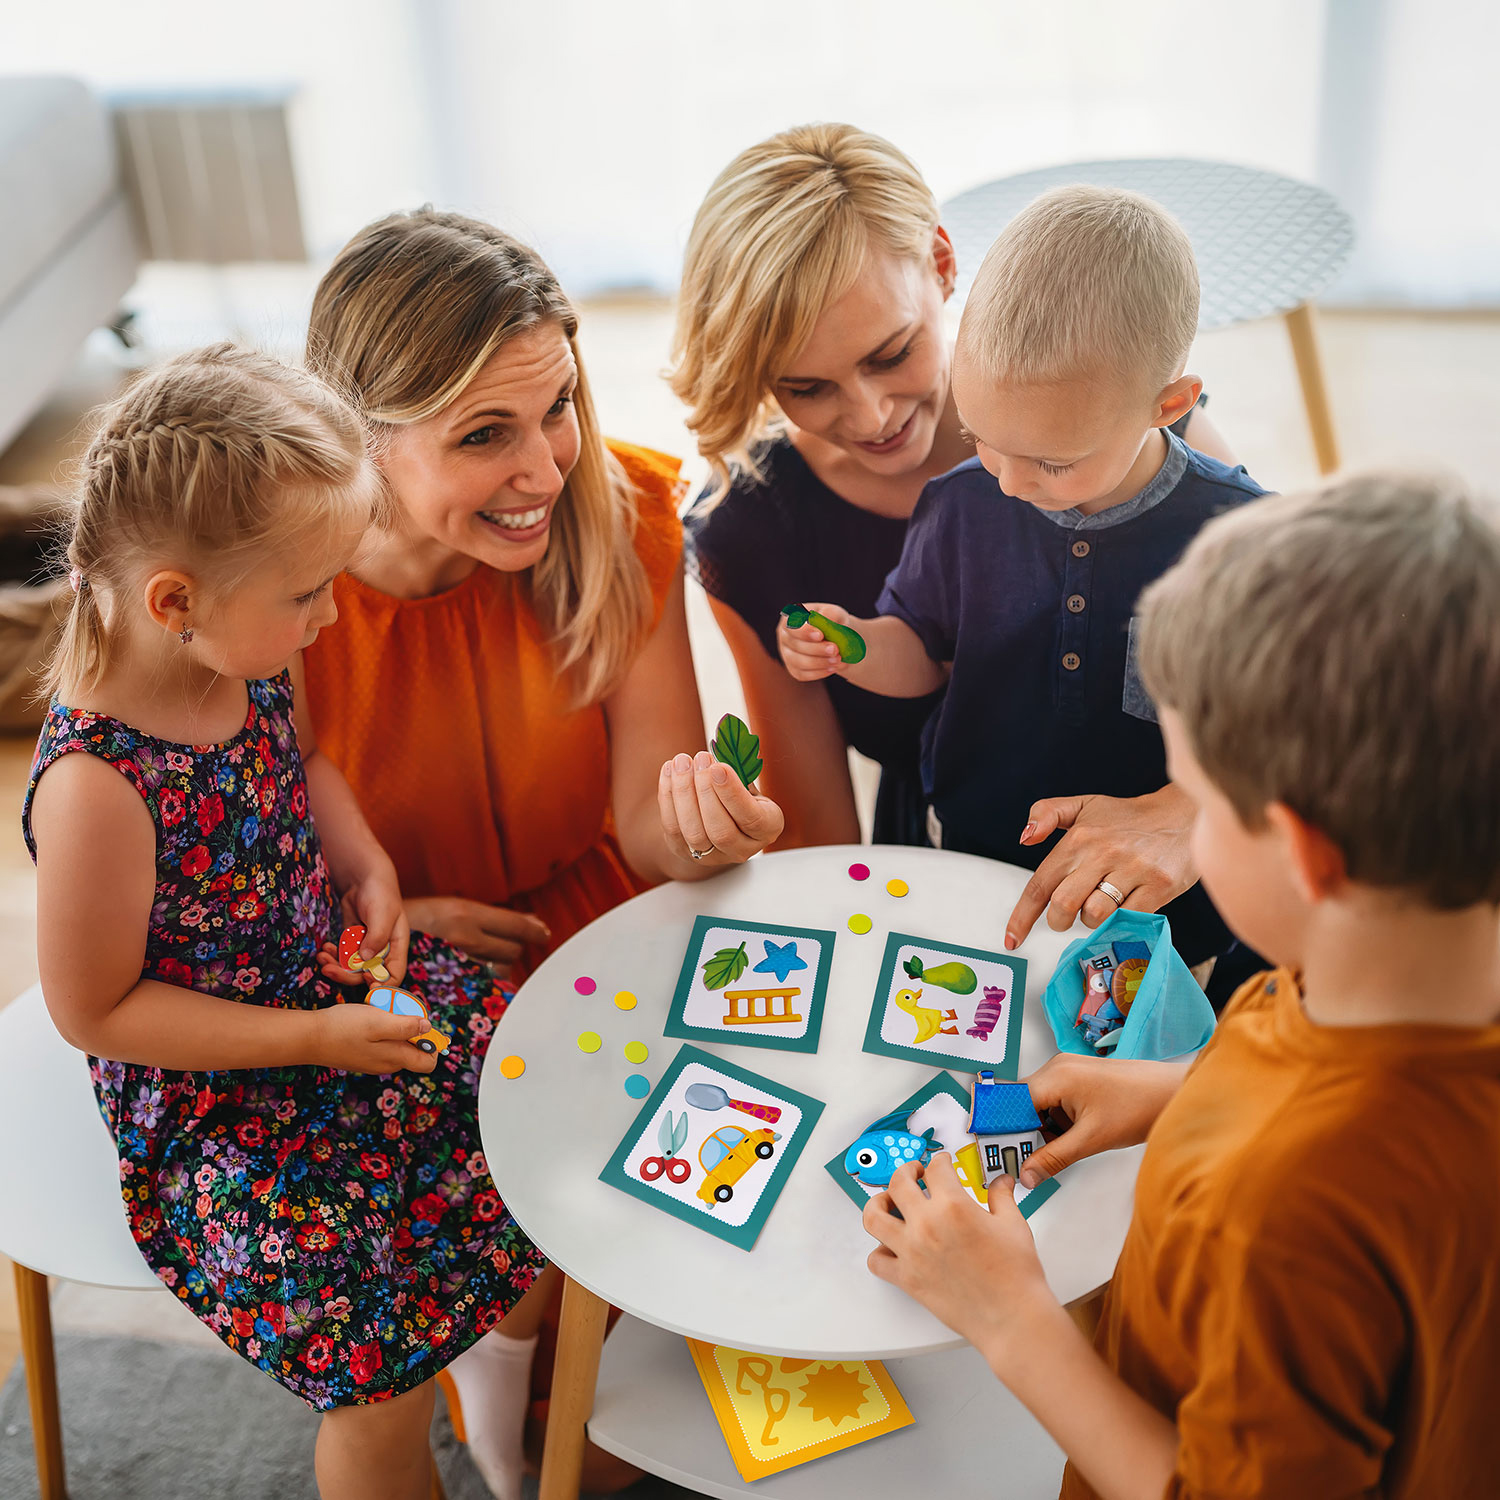 Lesbian couple at the table playing board game with children.